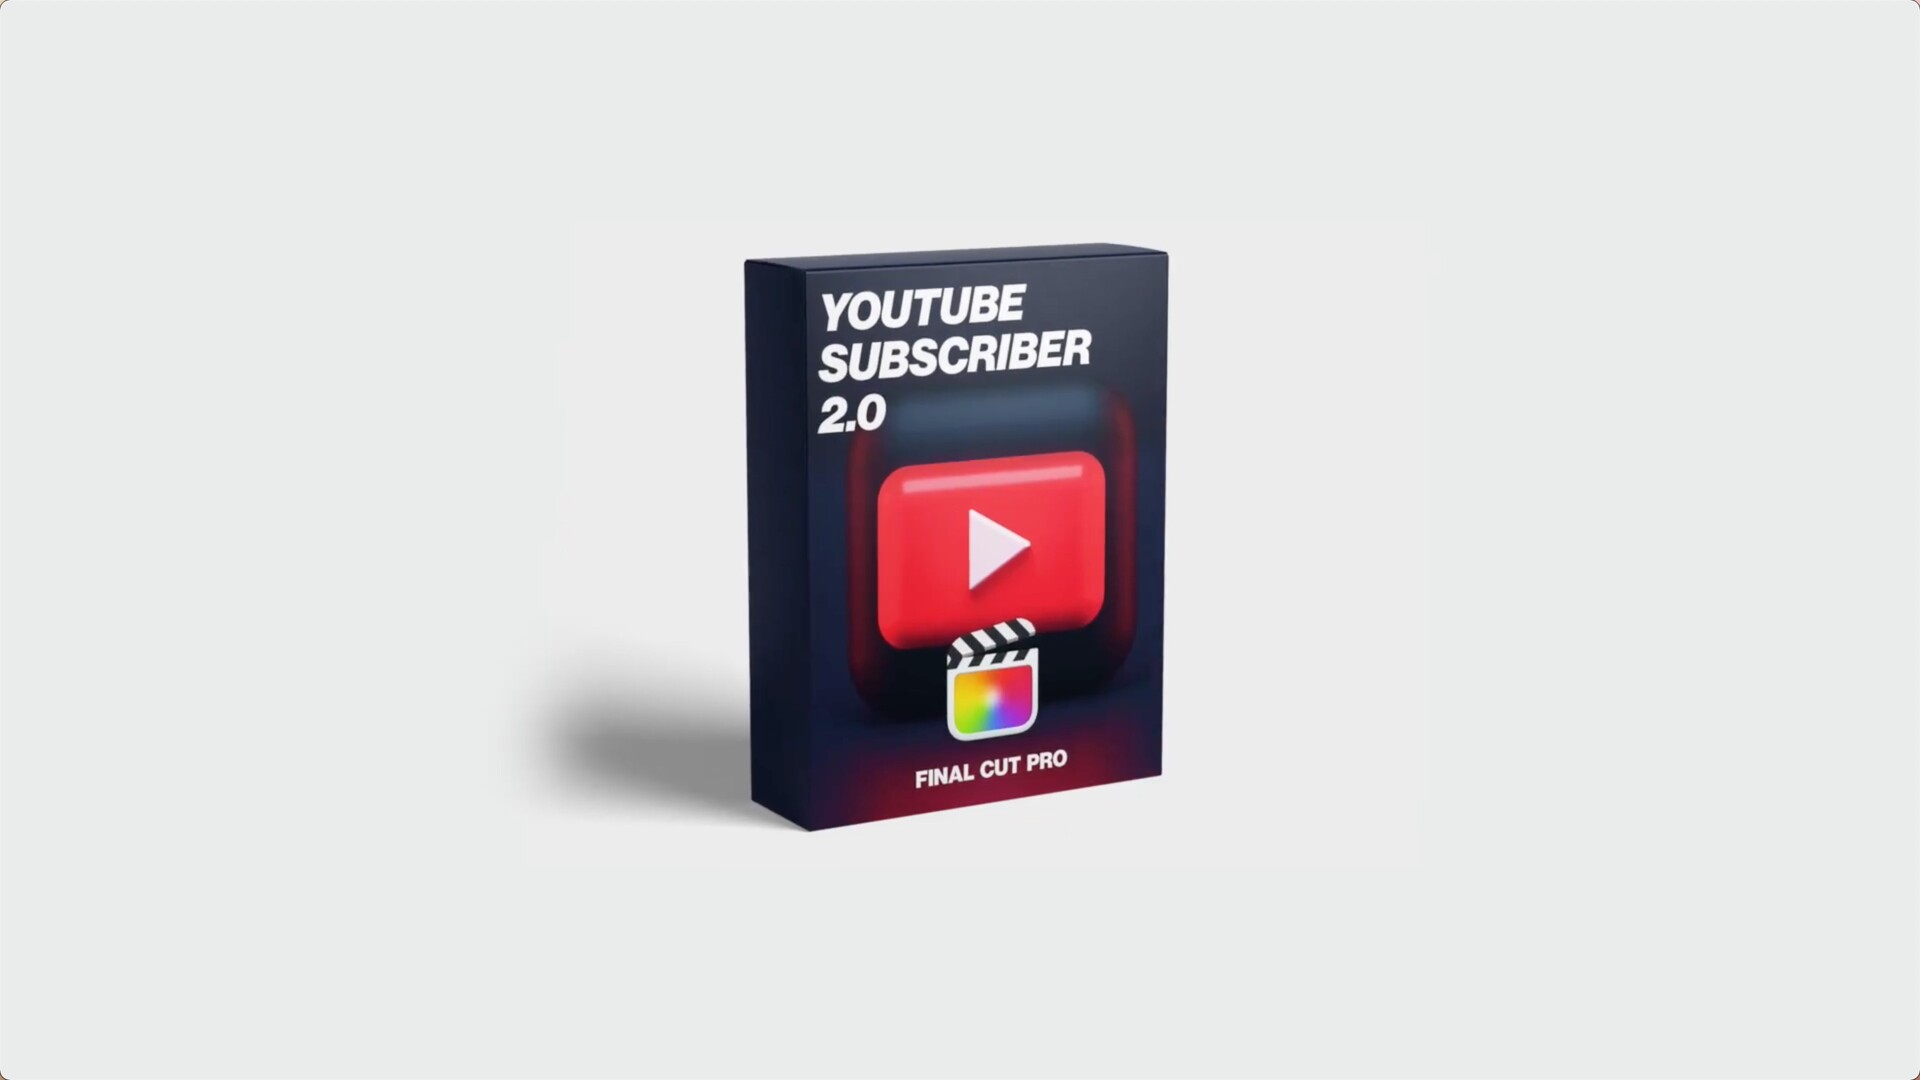 fcpx插件 YouTube Subscribe 2.0 for Mac(油管订阅按钮标题)